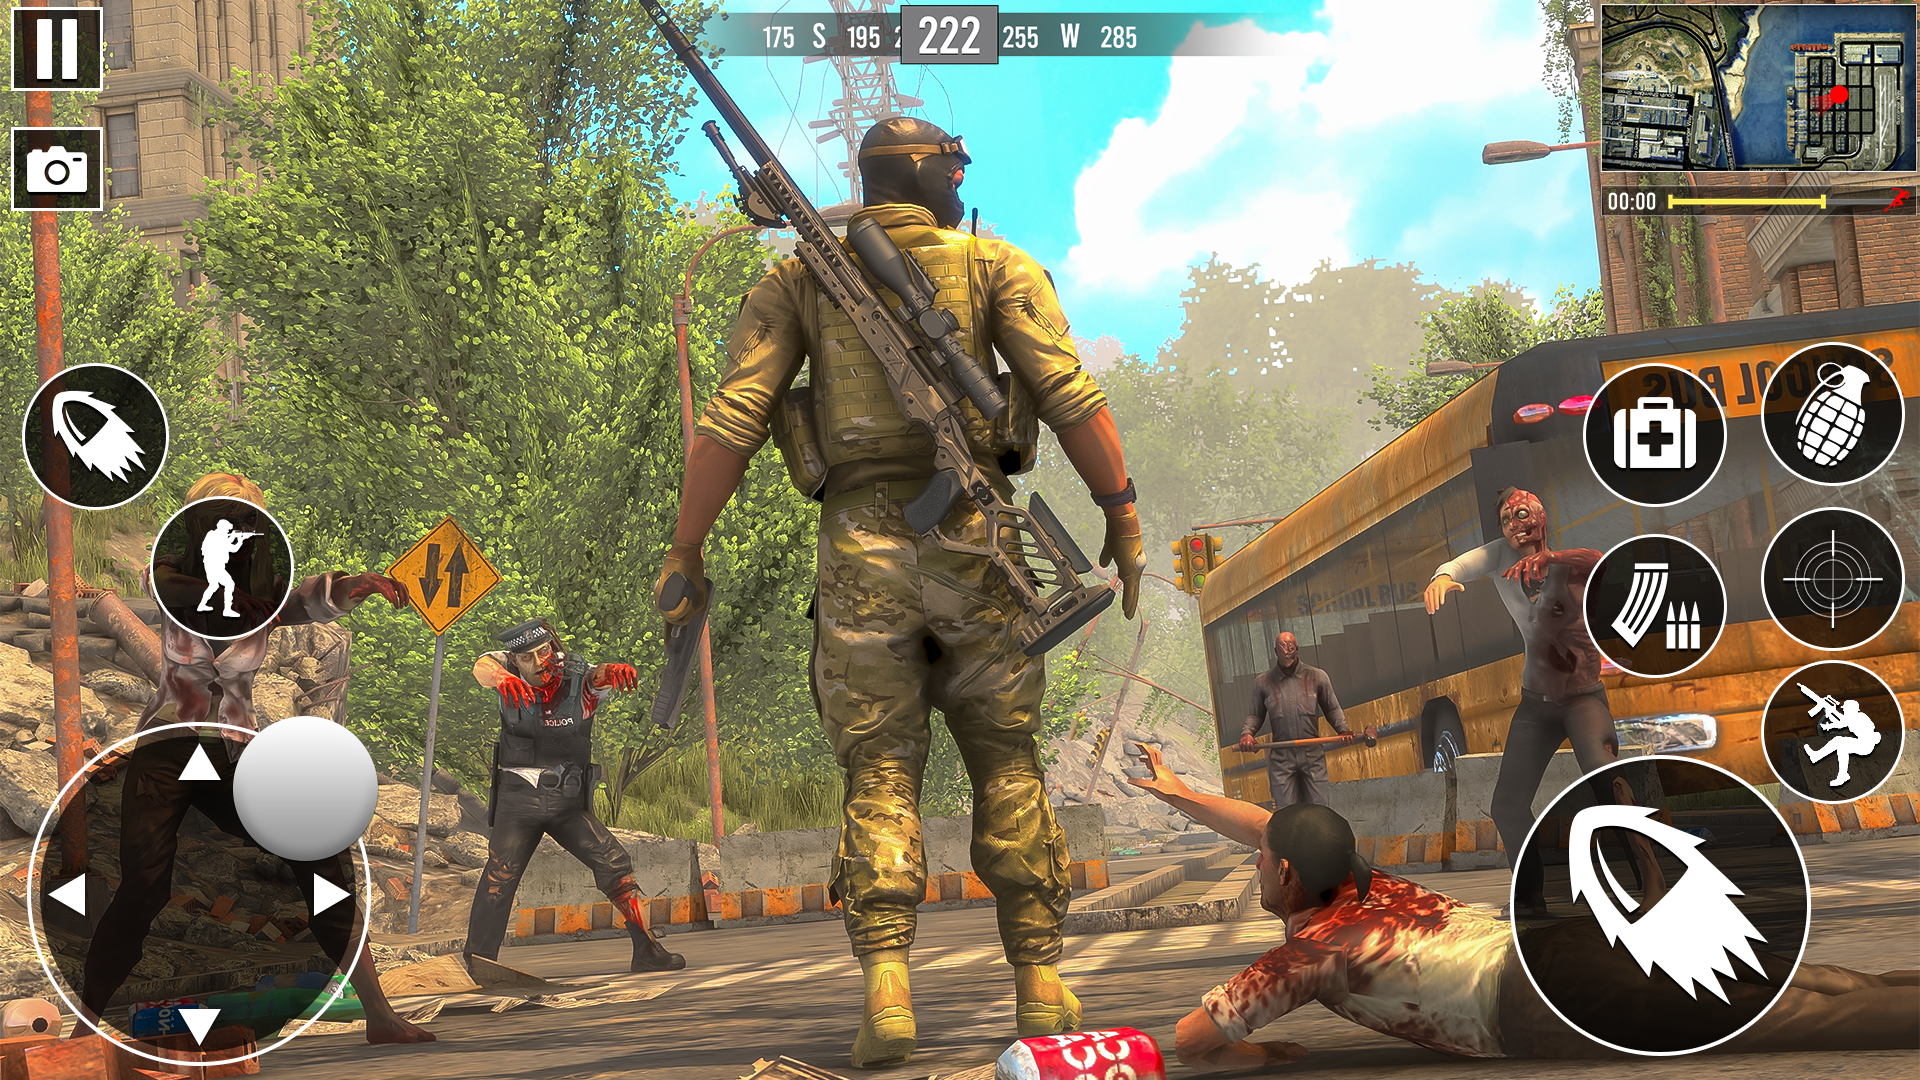 Commando War Army Game Offline android iOS apk download for free